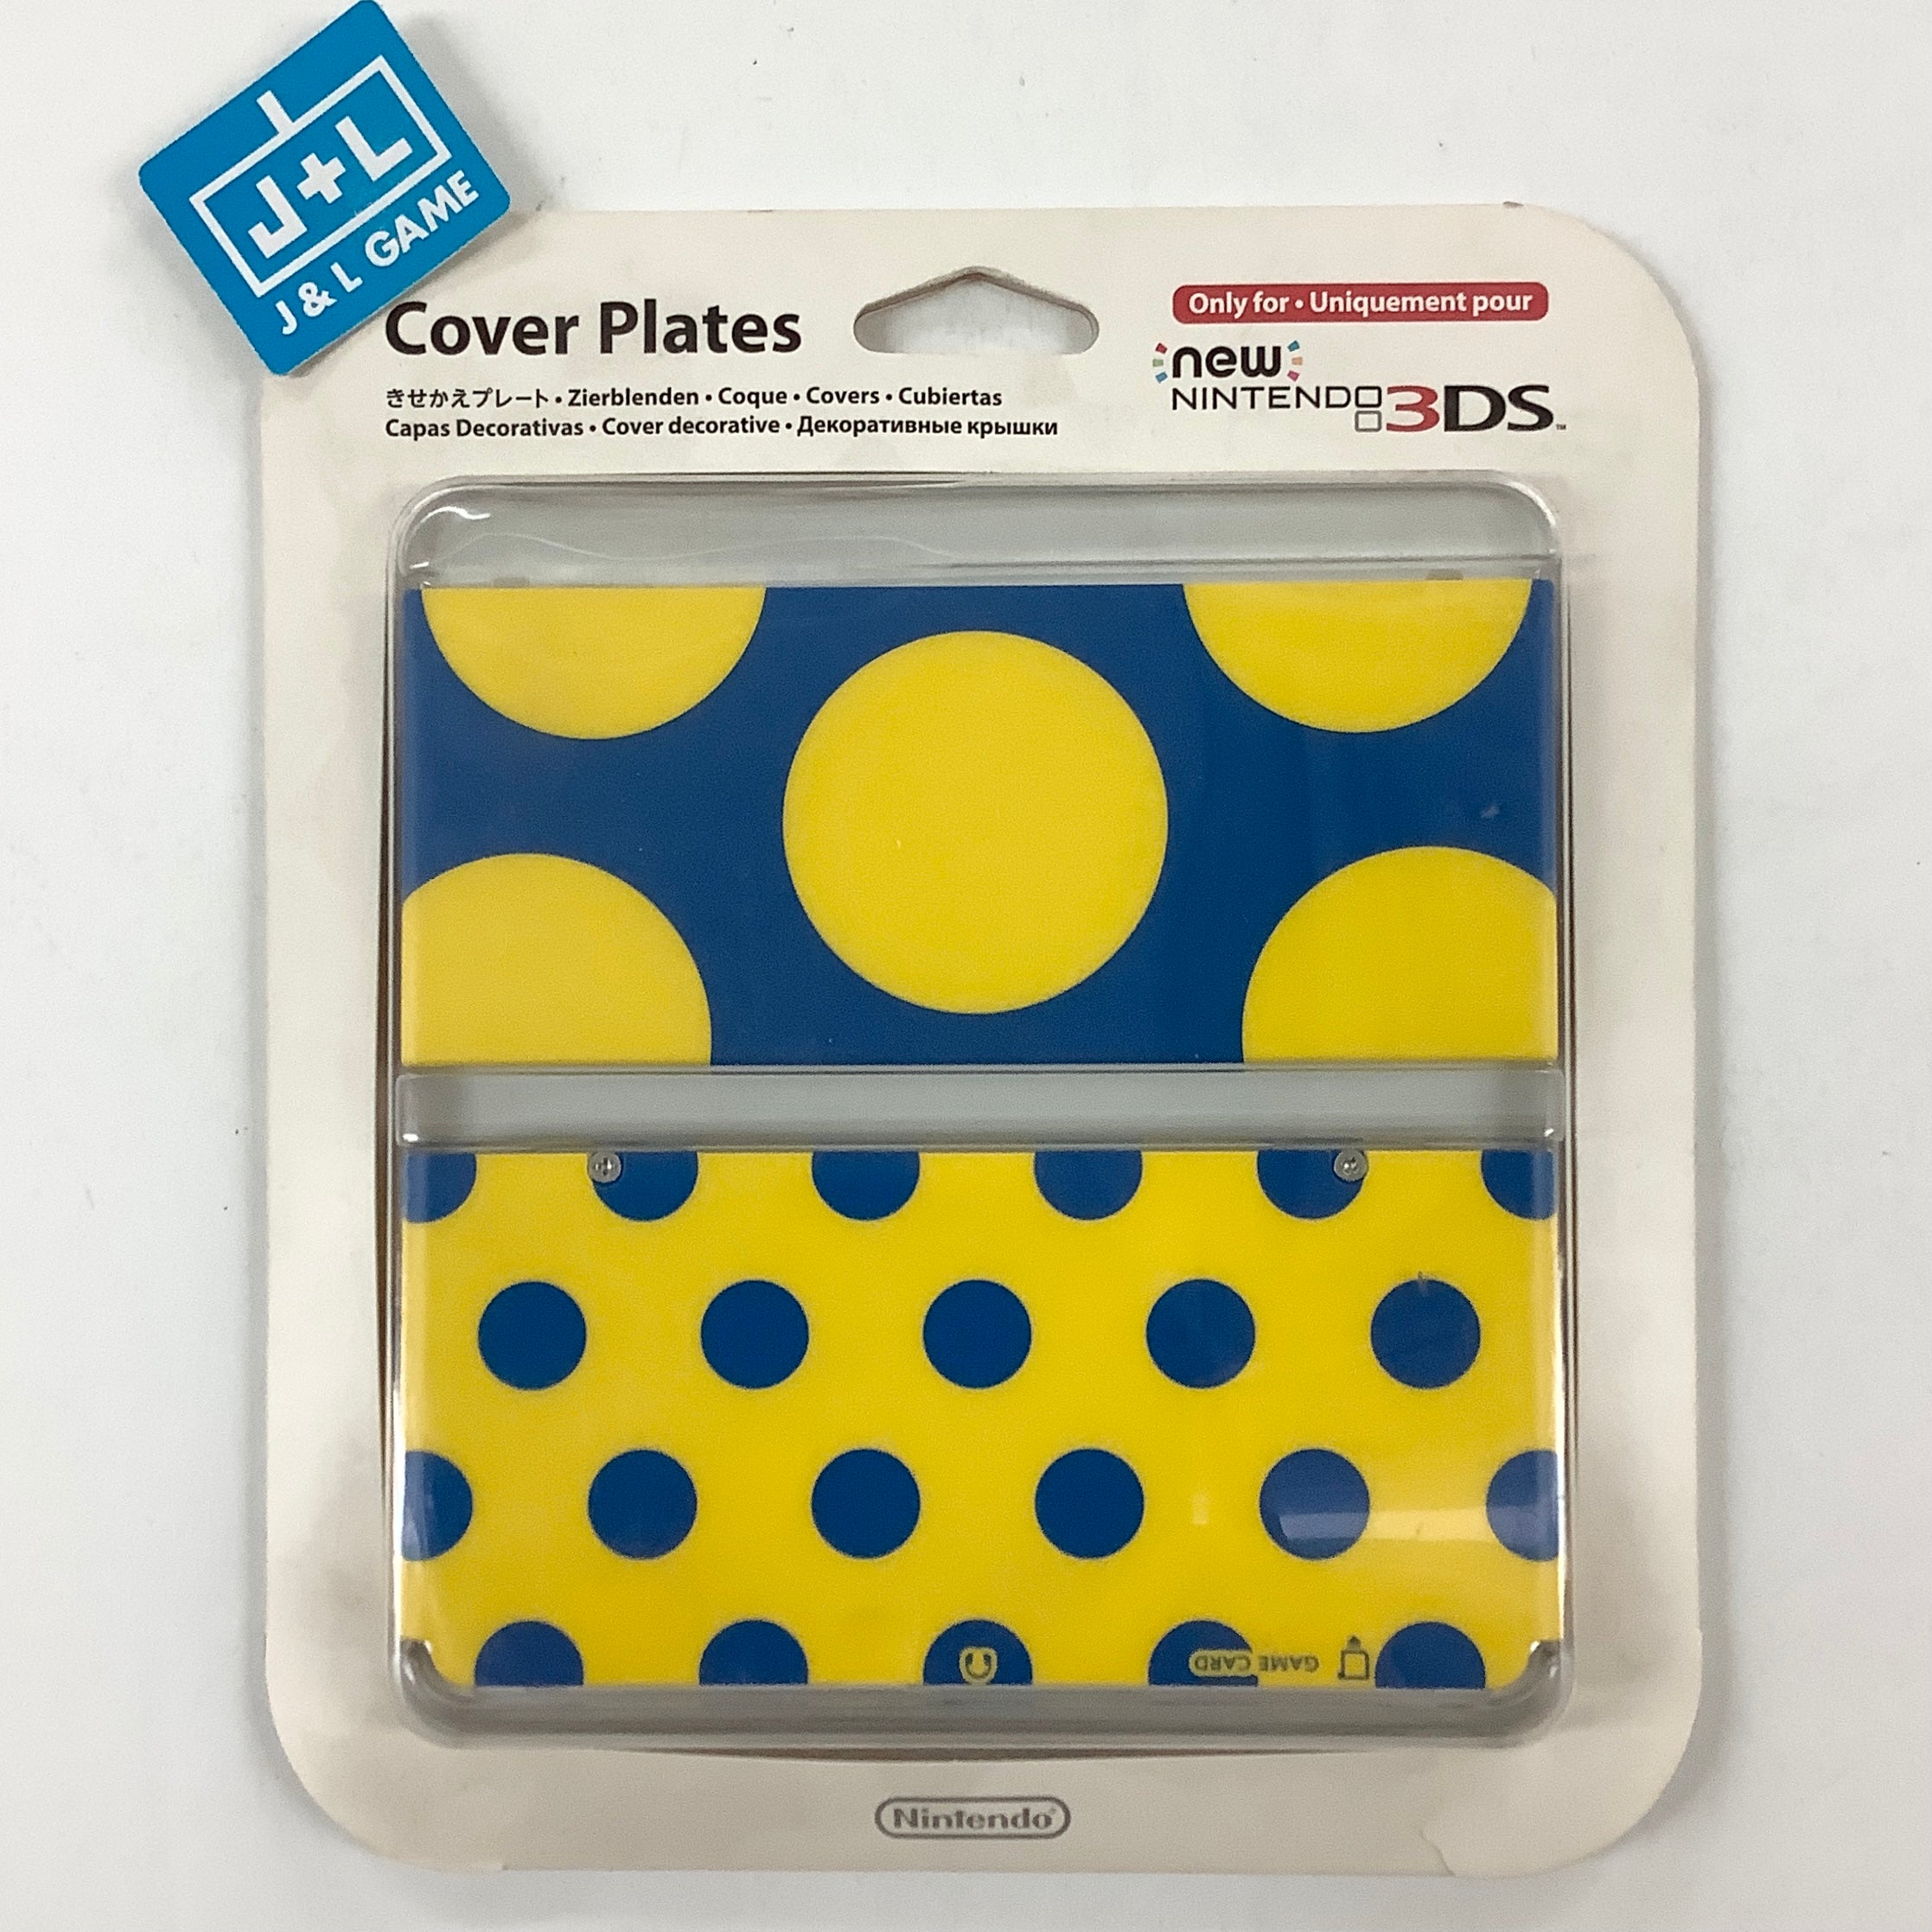 New Nintendo 3DS Cover Plates No.018 (Yellow Circles) - New Nintendo 3DS (Japanese Import) Accessories Nintendo   